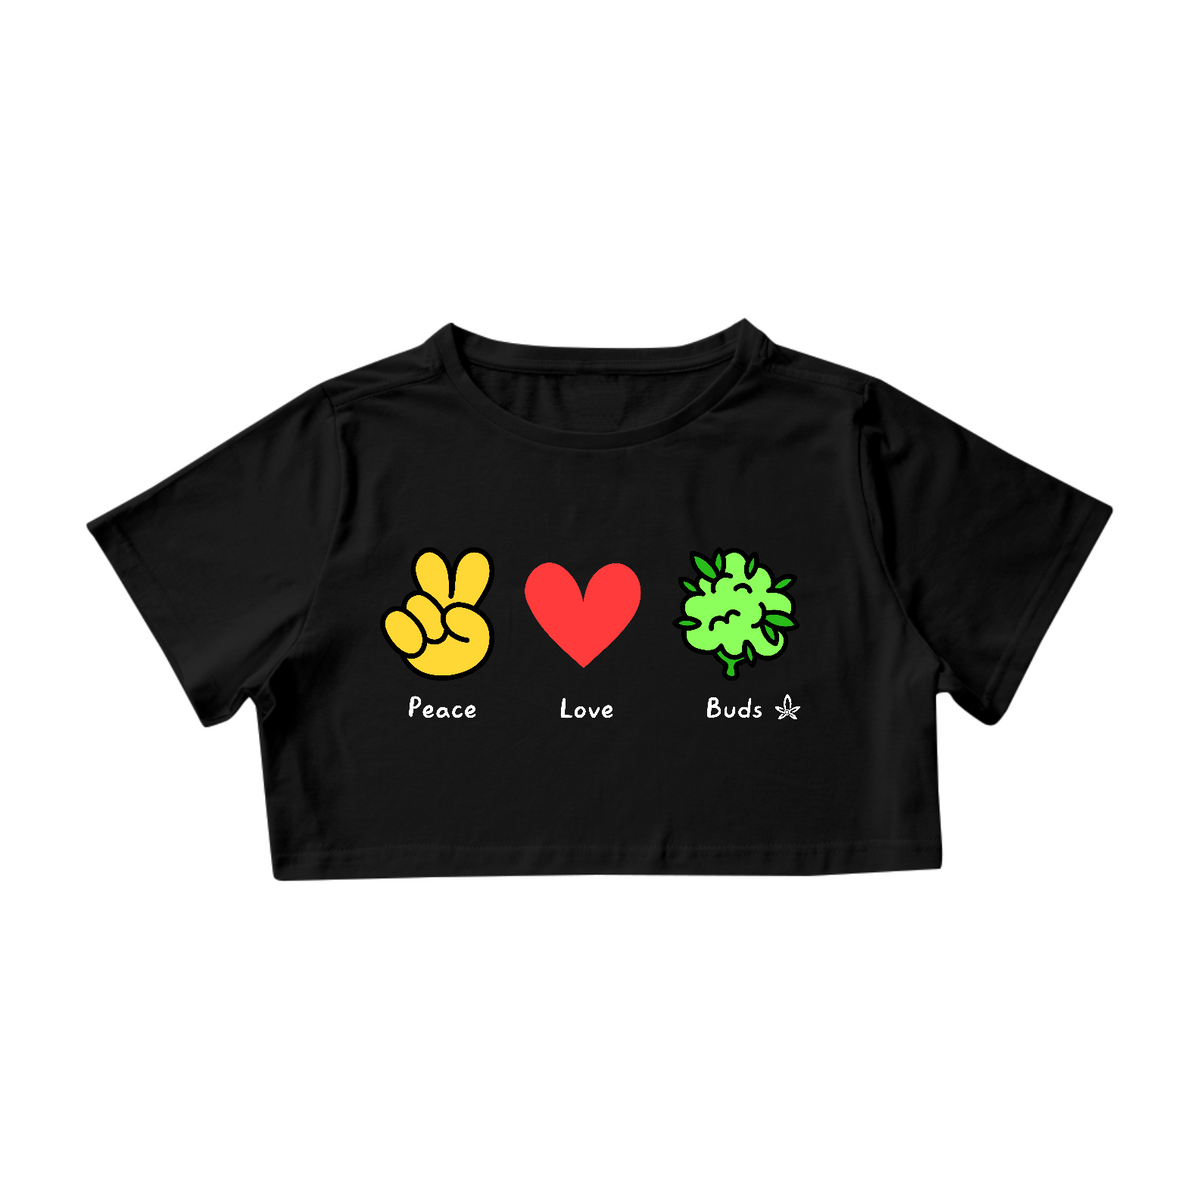 Nome do produto: Cropped Peace and Love and Buds Logo Branco